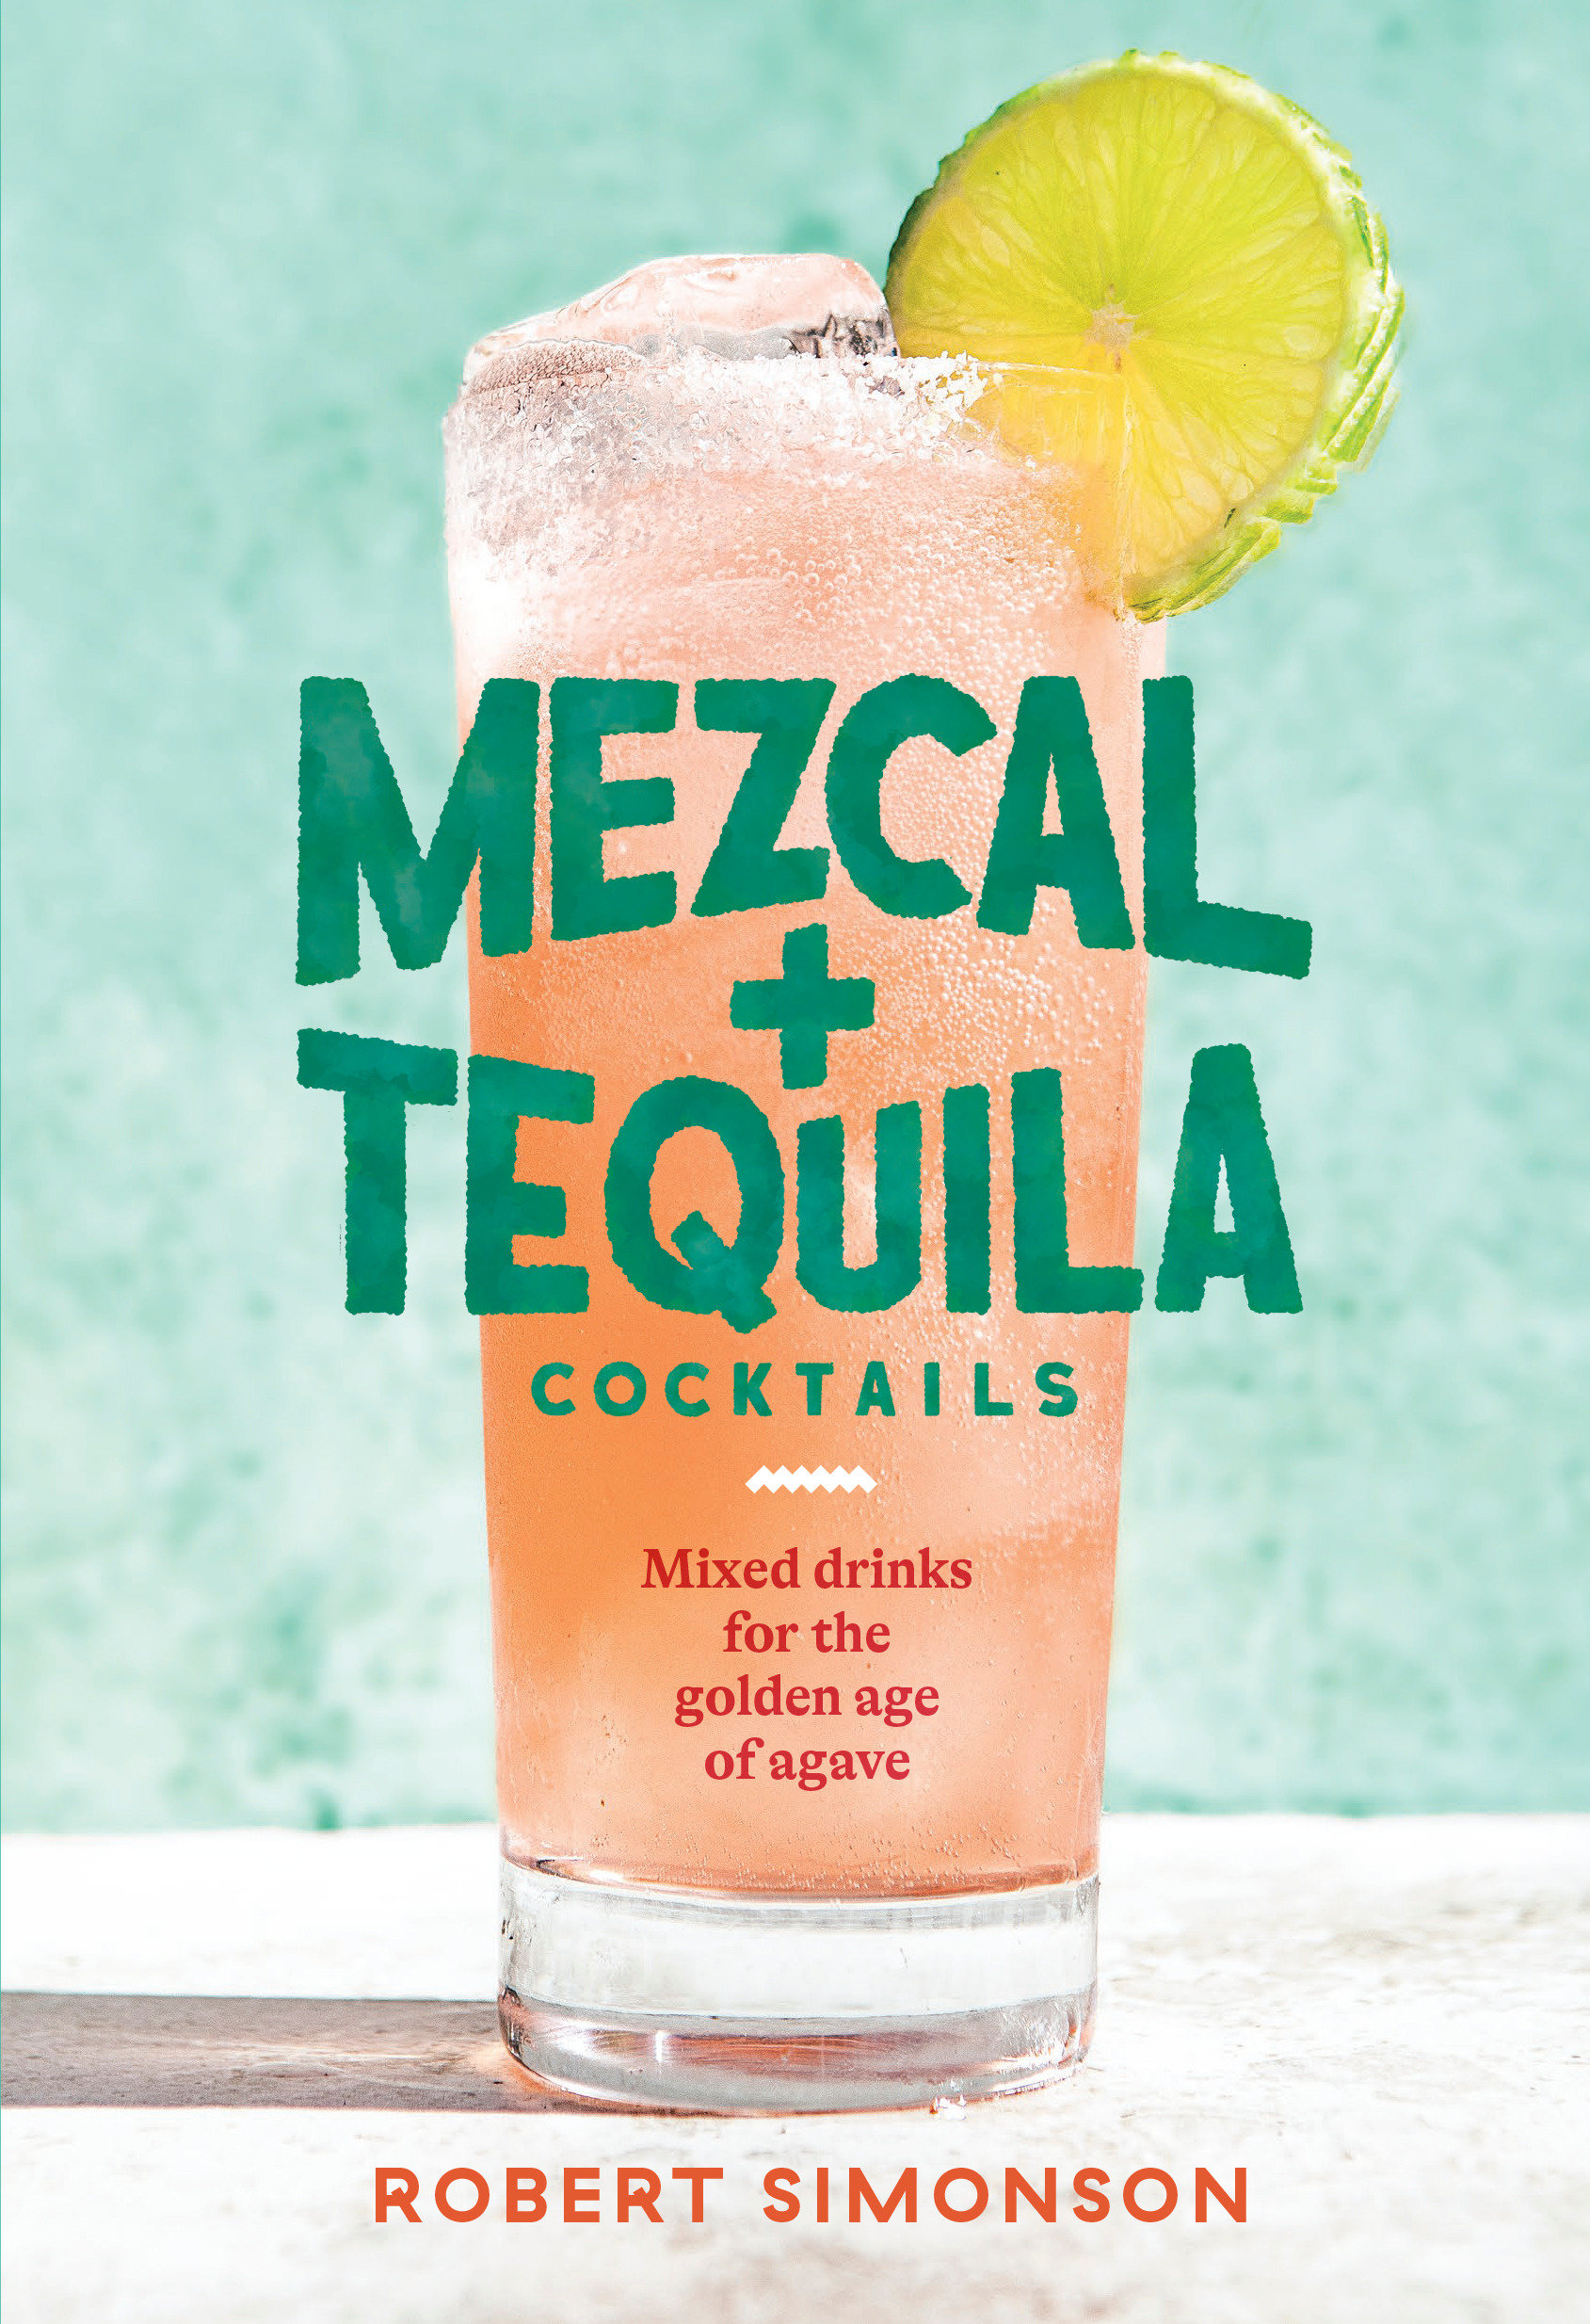 Mezcal And Tequila Cocktails (Hardcover Book)